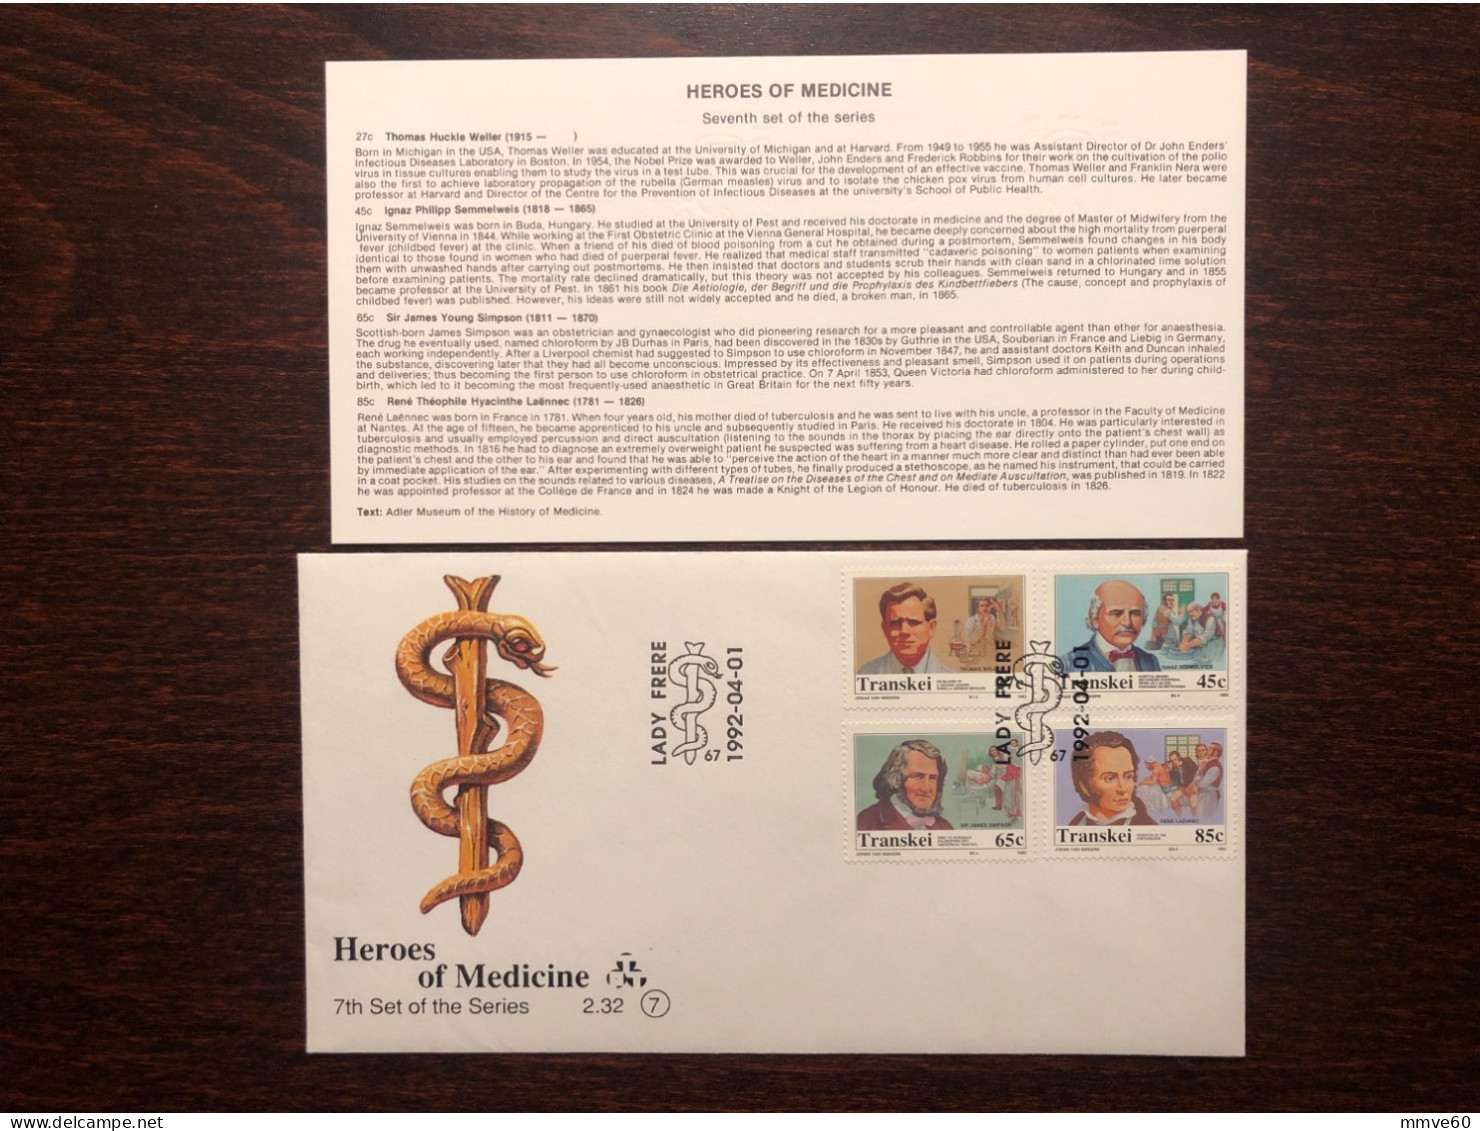 TRANSKEI FDC COVER 1992 YEAR HEROES OF MEDICINE WELLER SEMMELWEIS SIMPSON LAENNEC  HEALTH MEDICINE STAMPS - Transkei